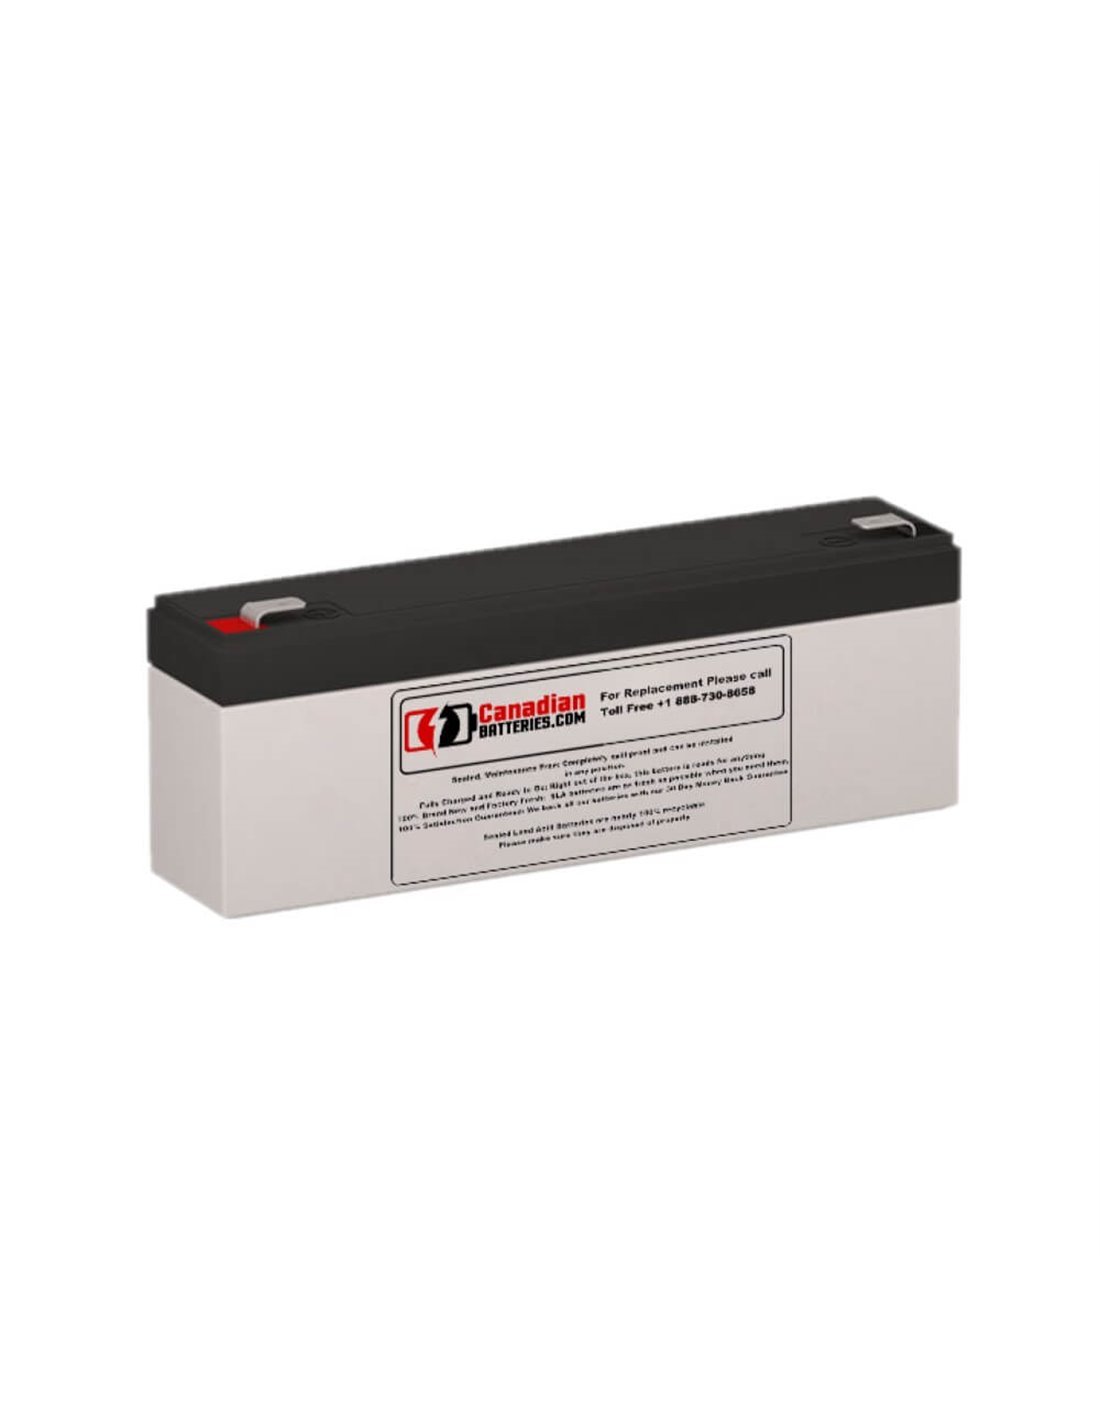 Battery for Intellipower Echnolo 34008 UPS, 1 x 12V, 2.3Ah - 27.6Wh